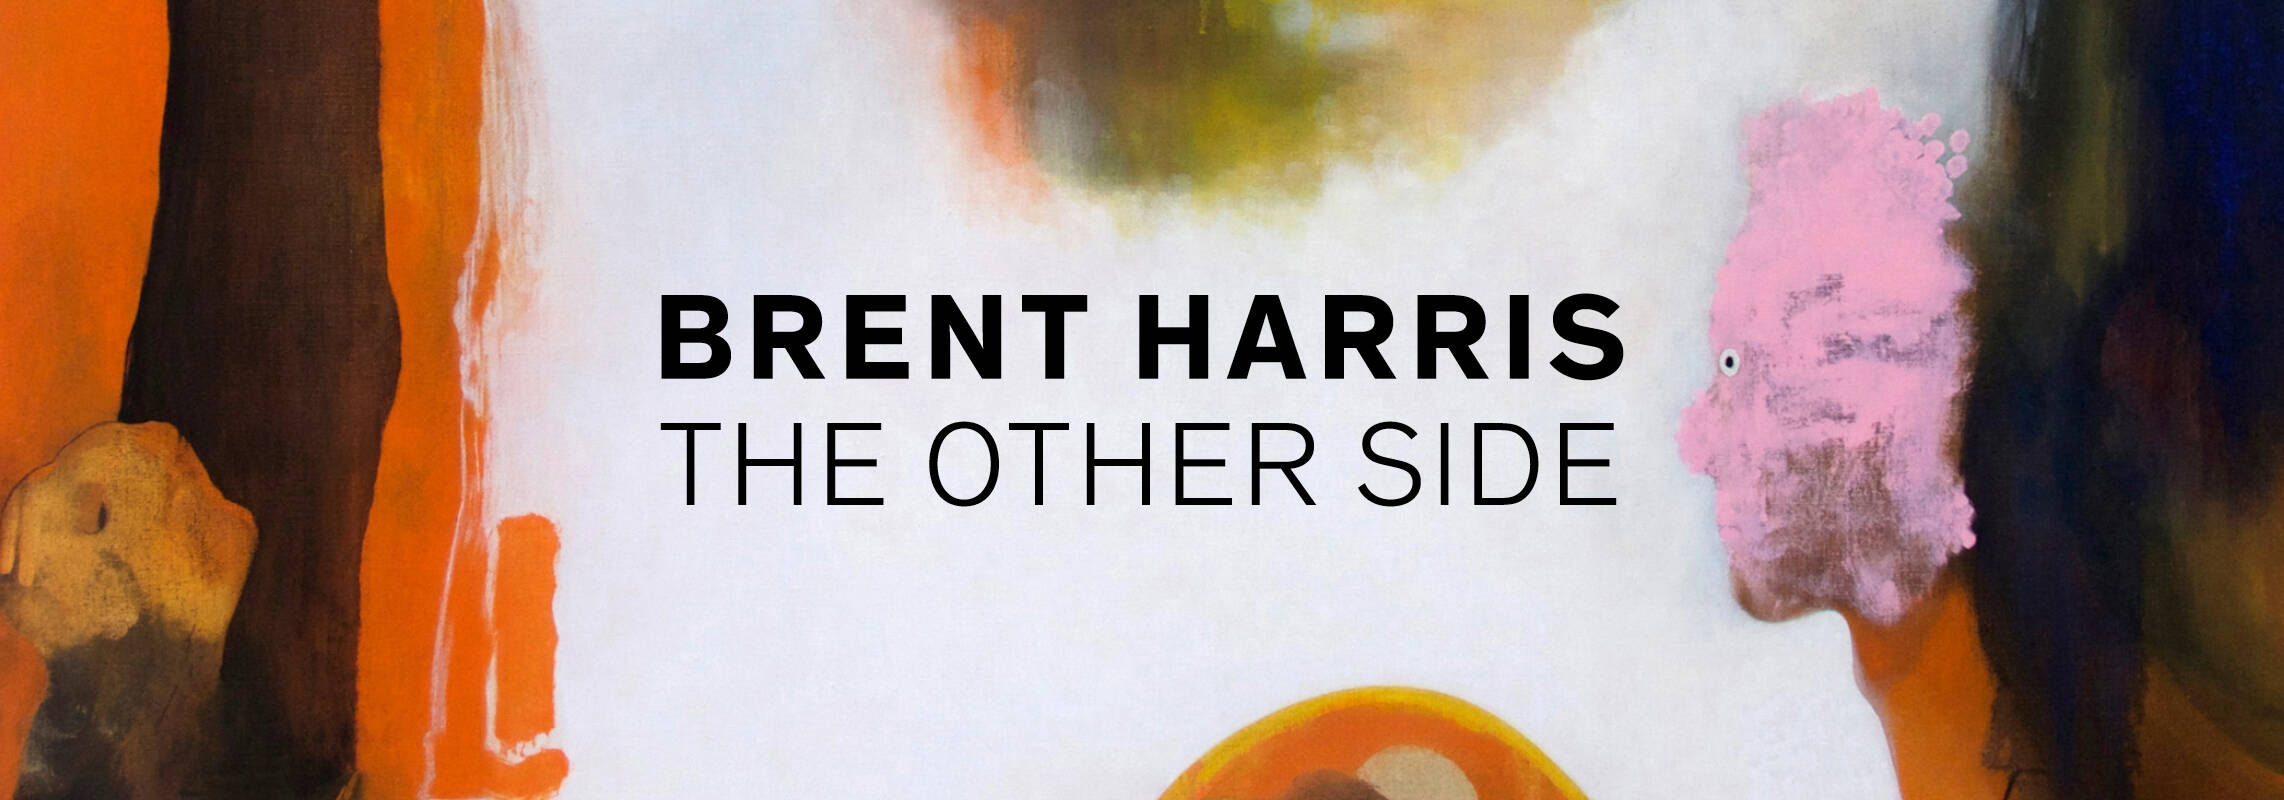 Brent Harris: The Other Side